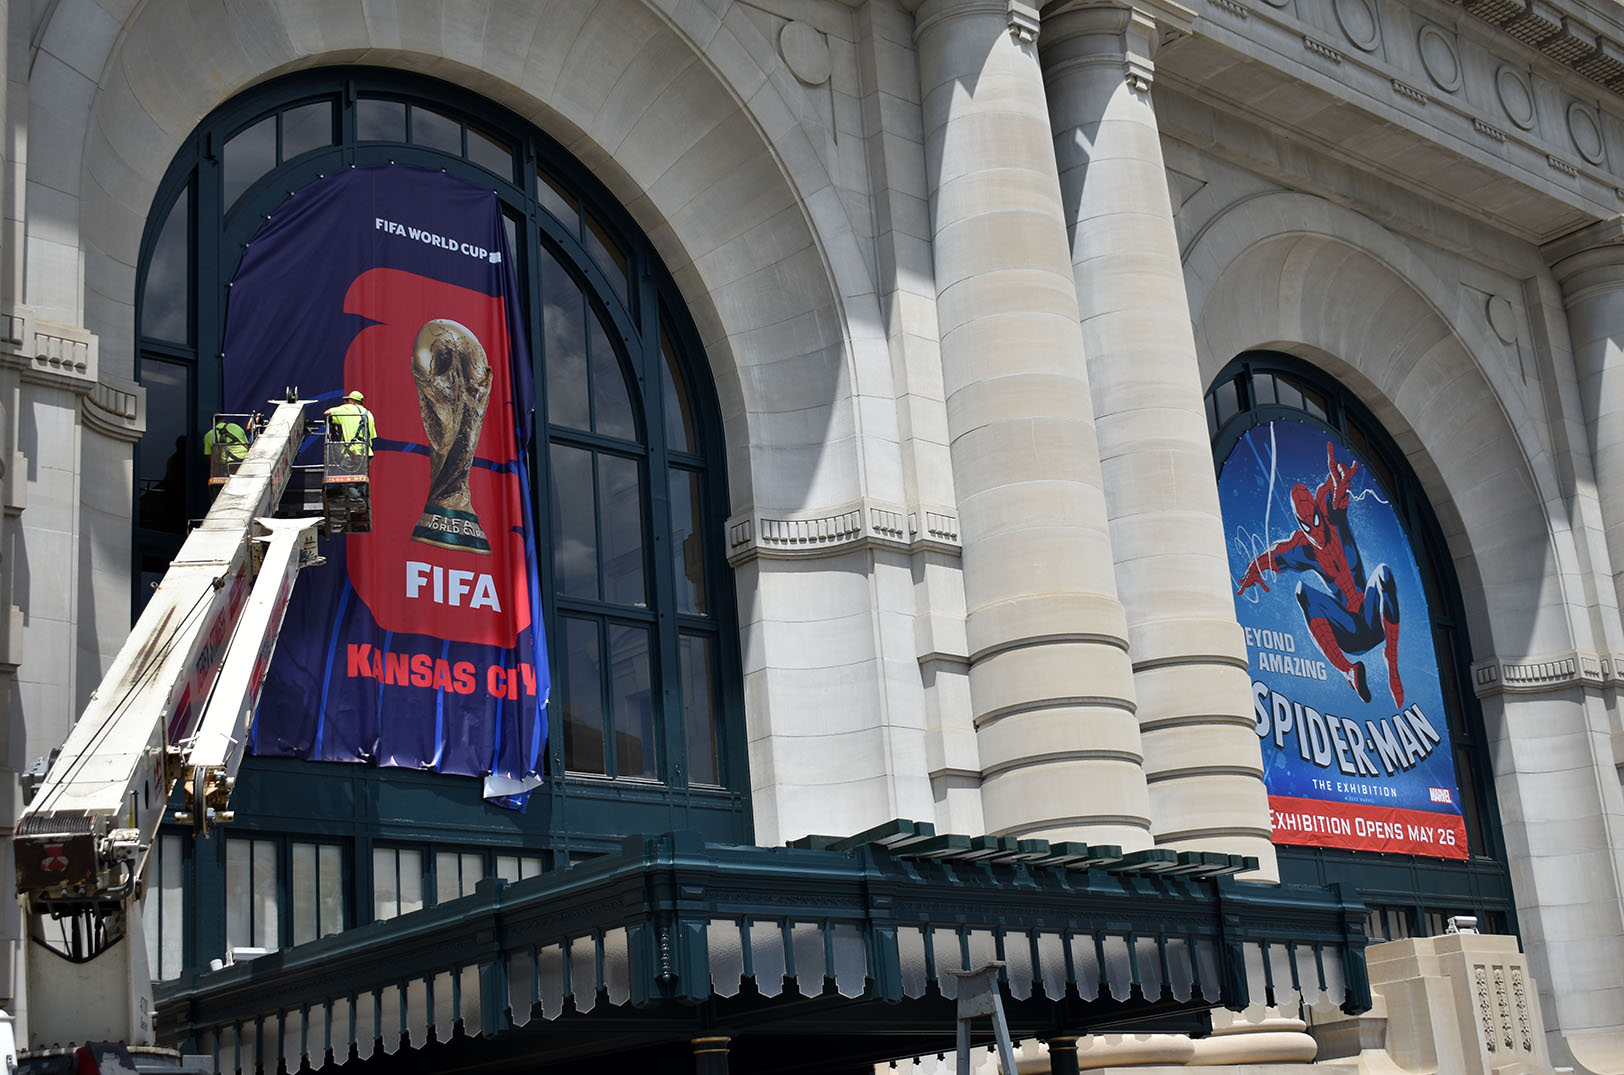 World Cup banners Union Station